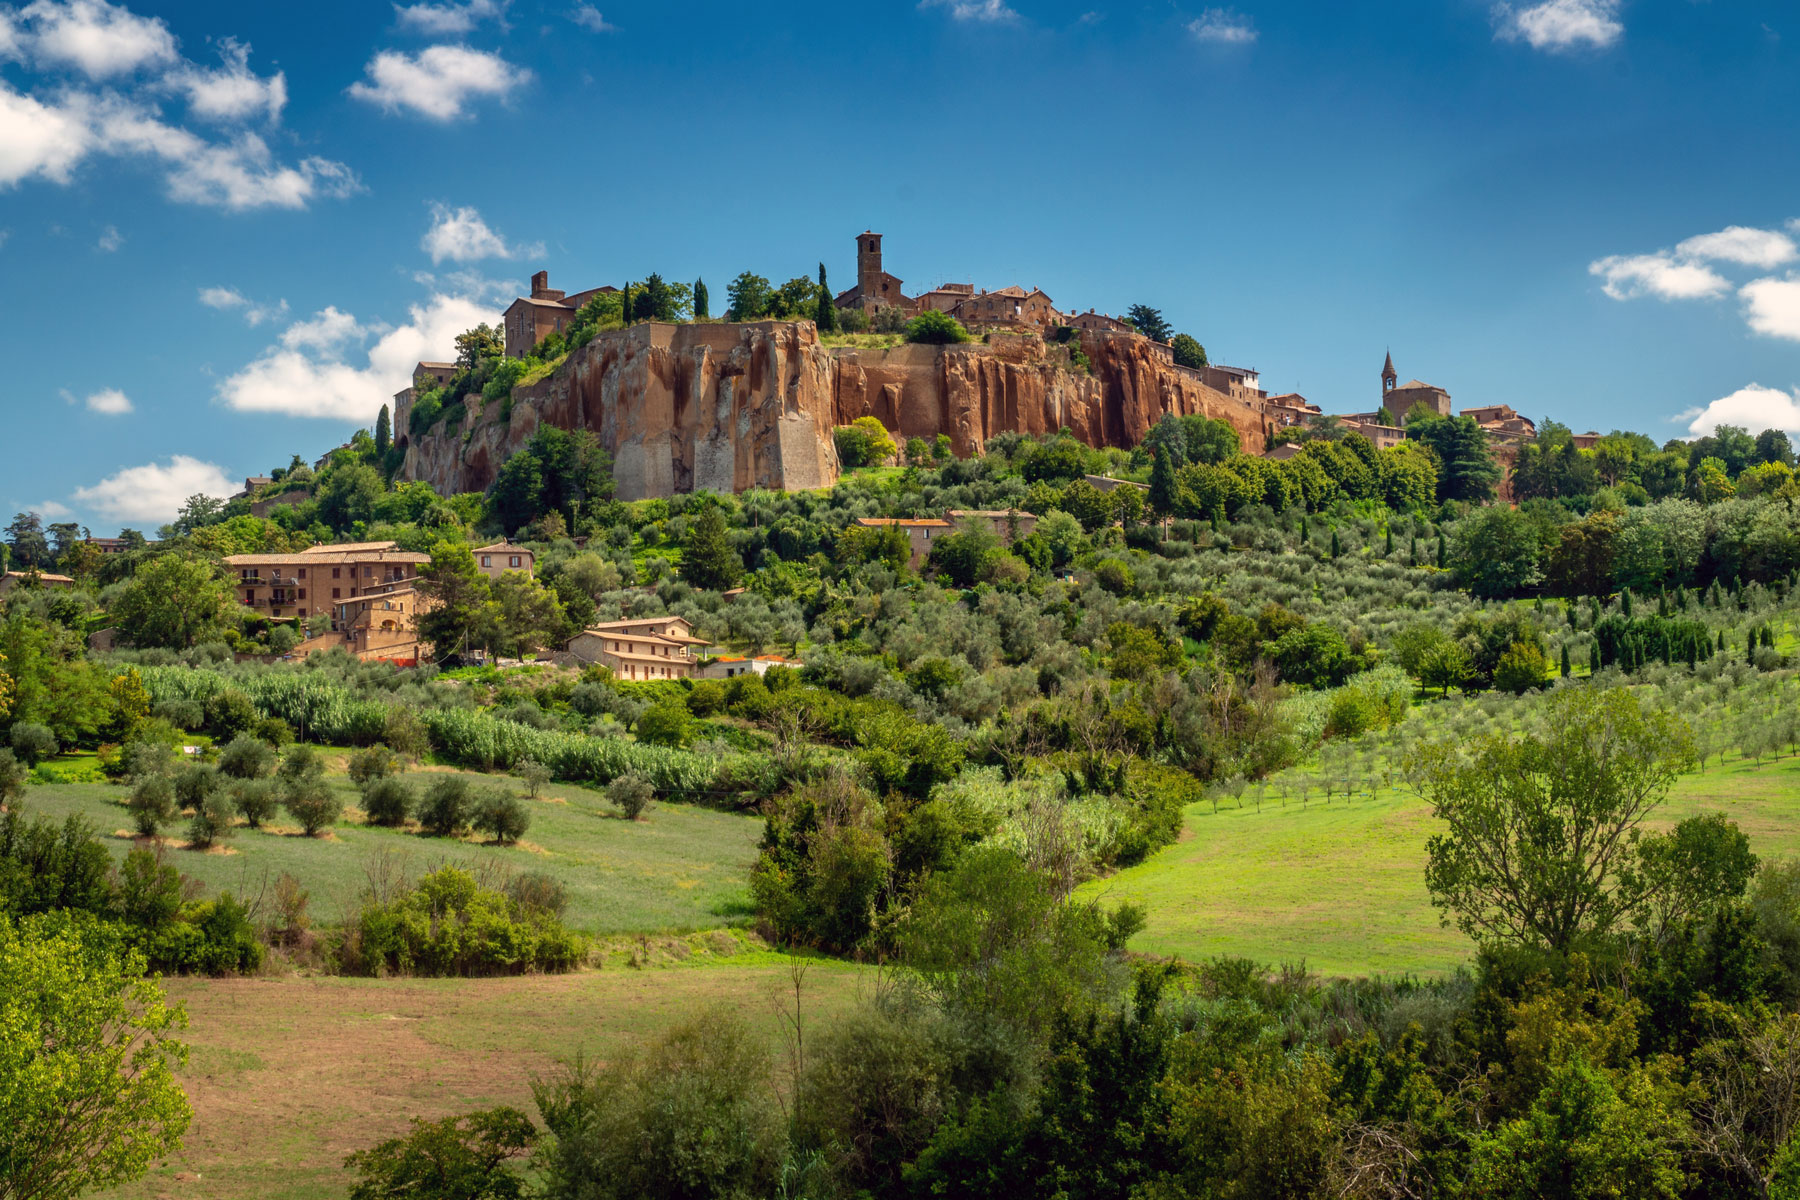 The walled city of Orvieto in Italy's Umbria region